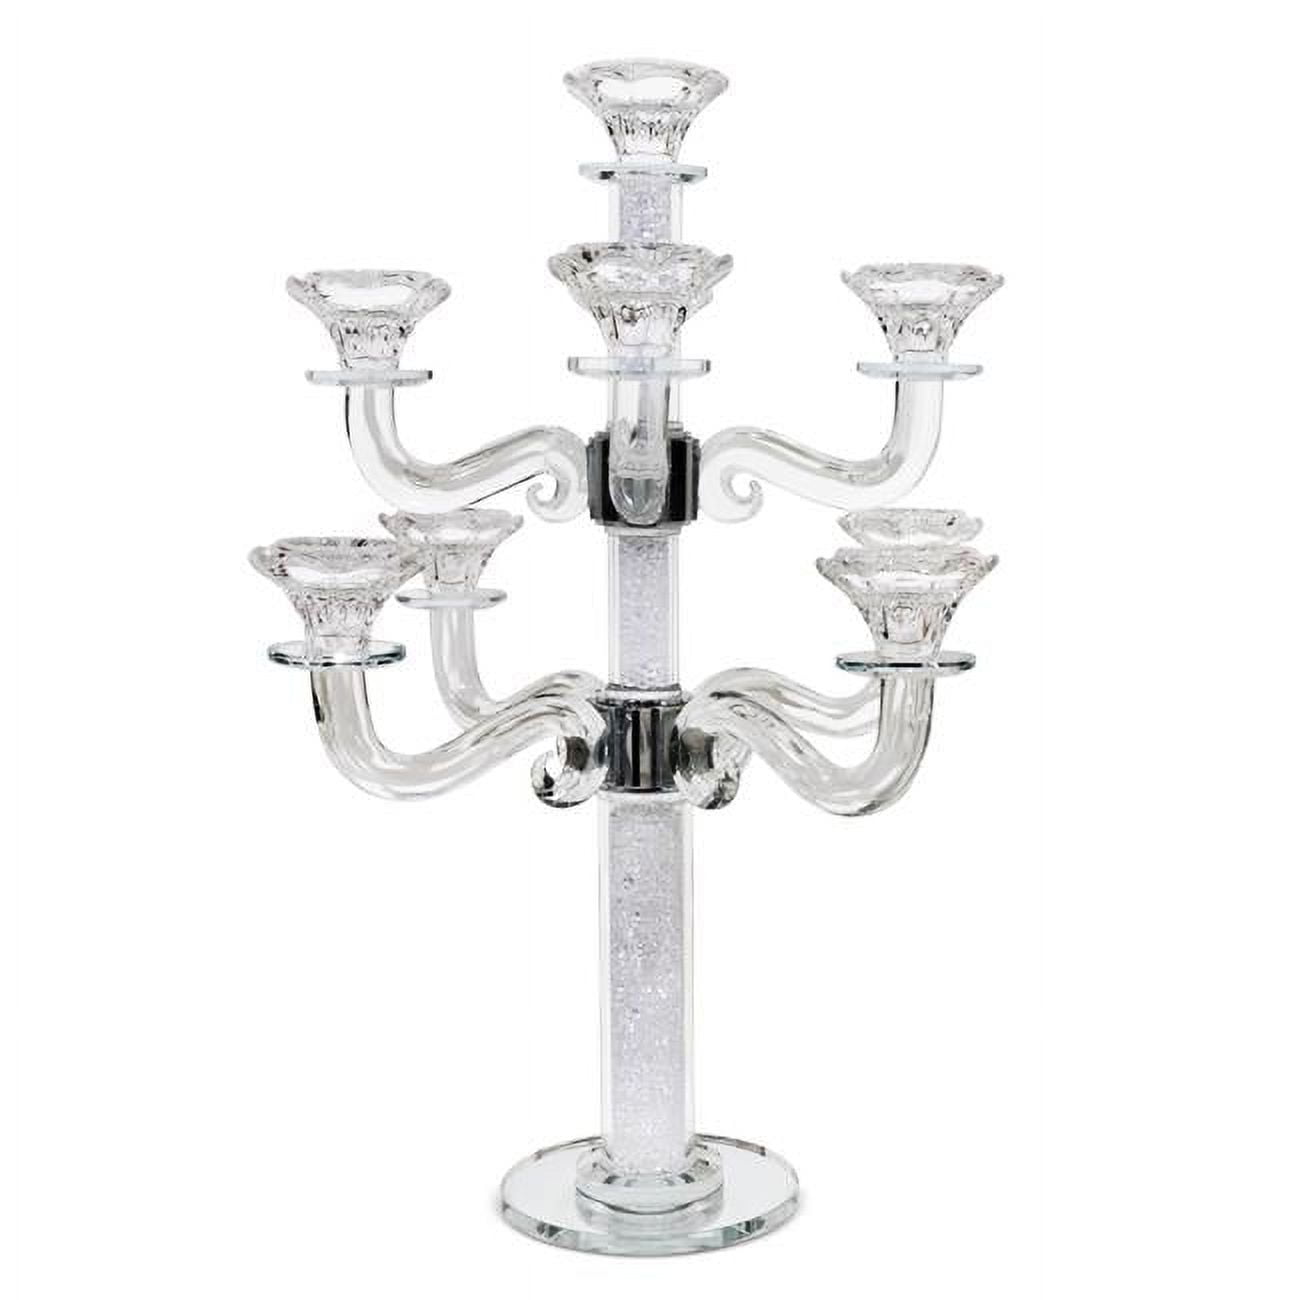 Picture of Schonfeld Collection 16953 18 in. Crystal Candelabra with 9 Branches White Filling Hanging Crystals